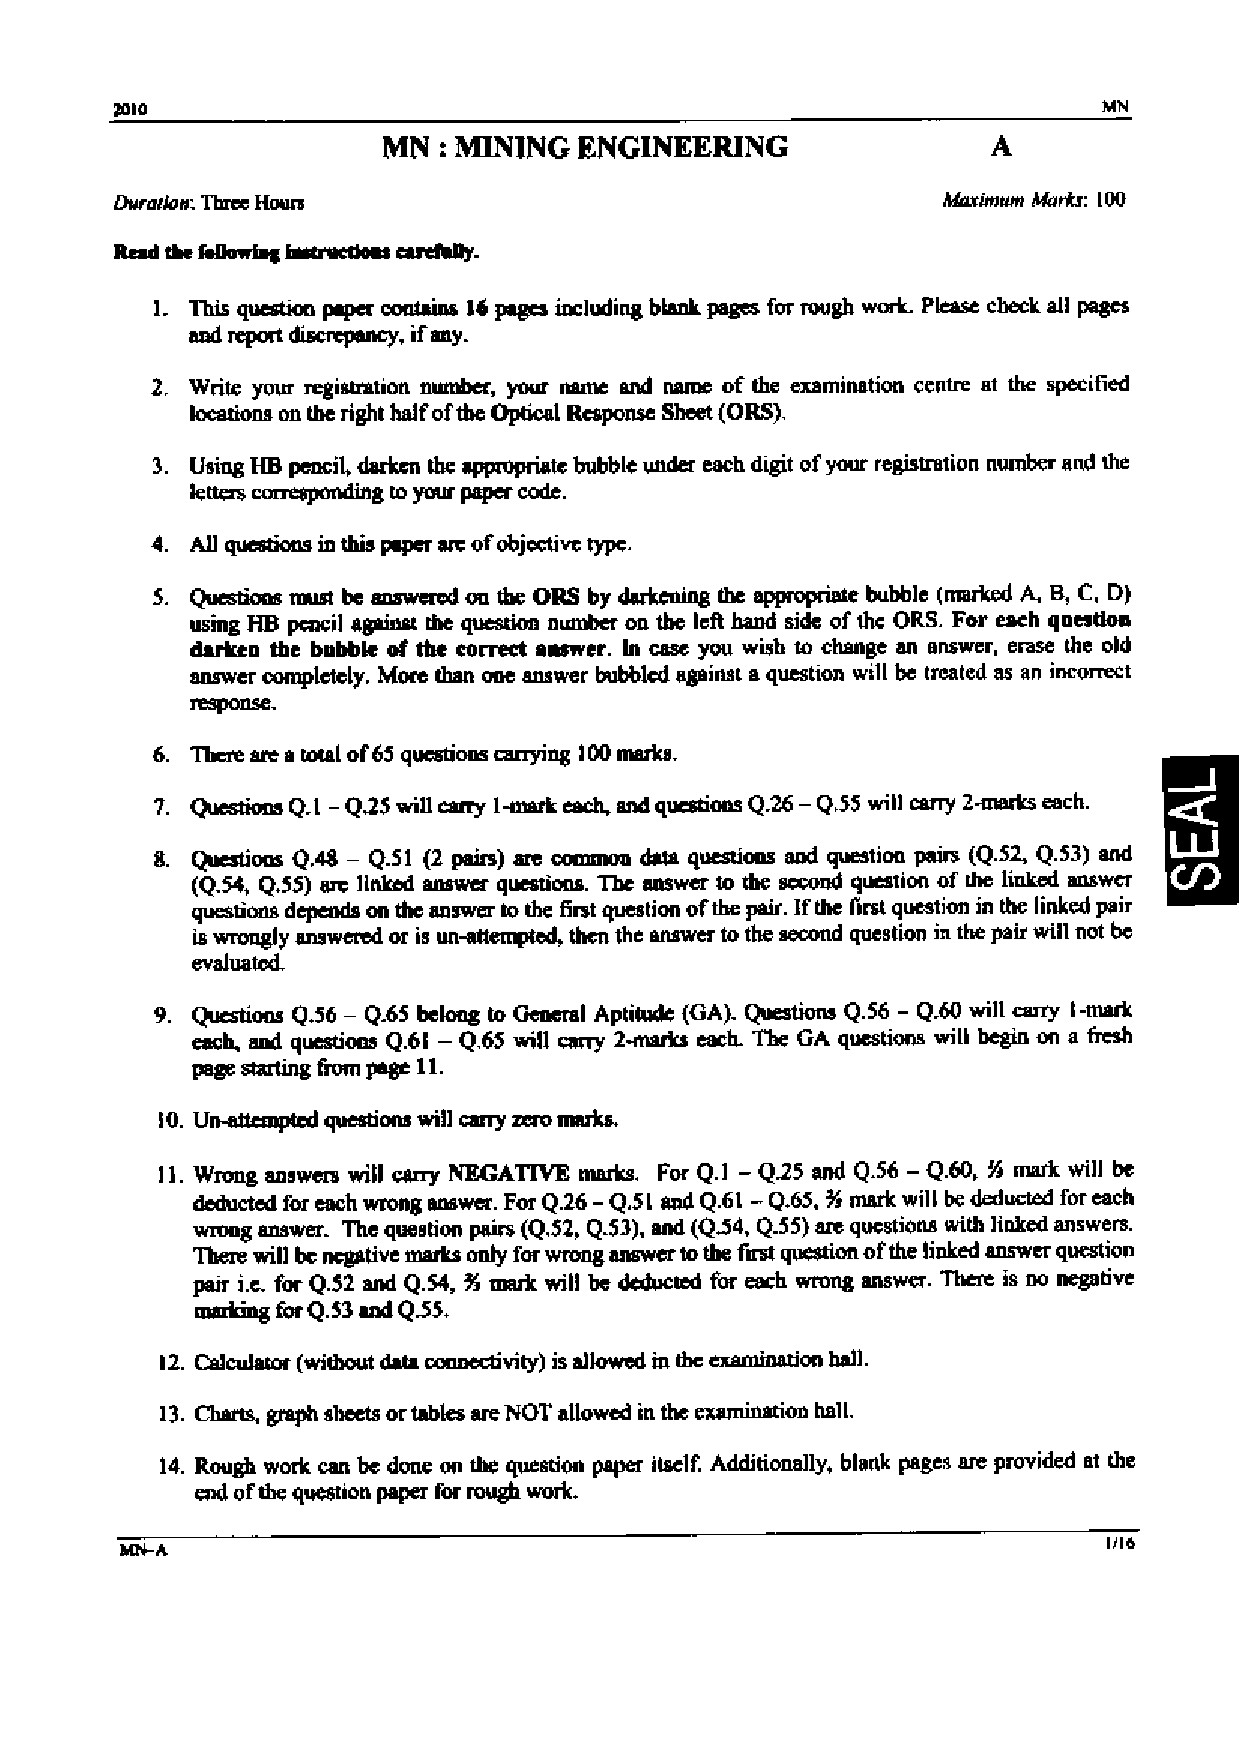 GATE Exam Question Paper 2010 Mining Engineering 1